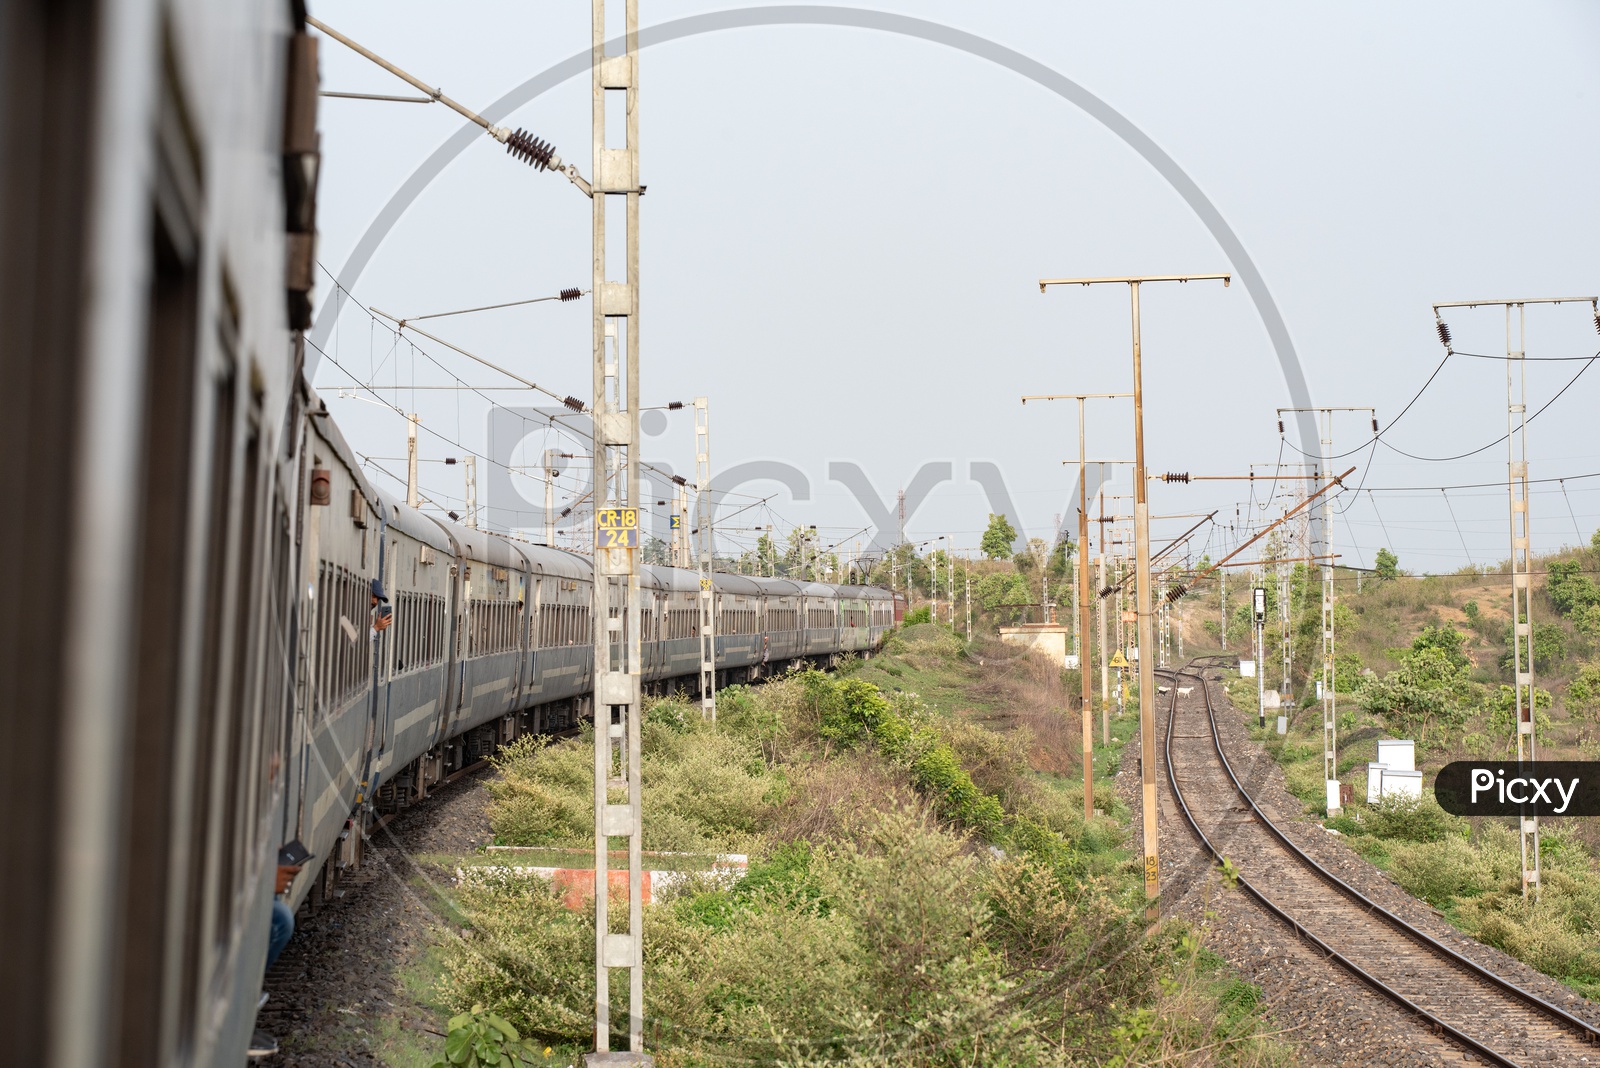 Indian Railways train On Track With a View Of Electricity Poles And Adjacent track